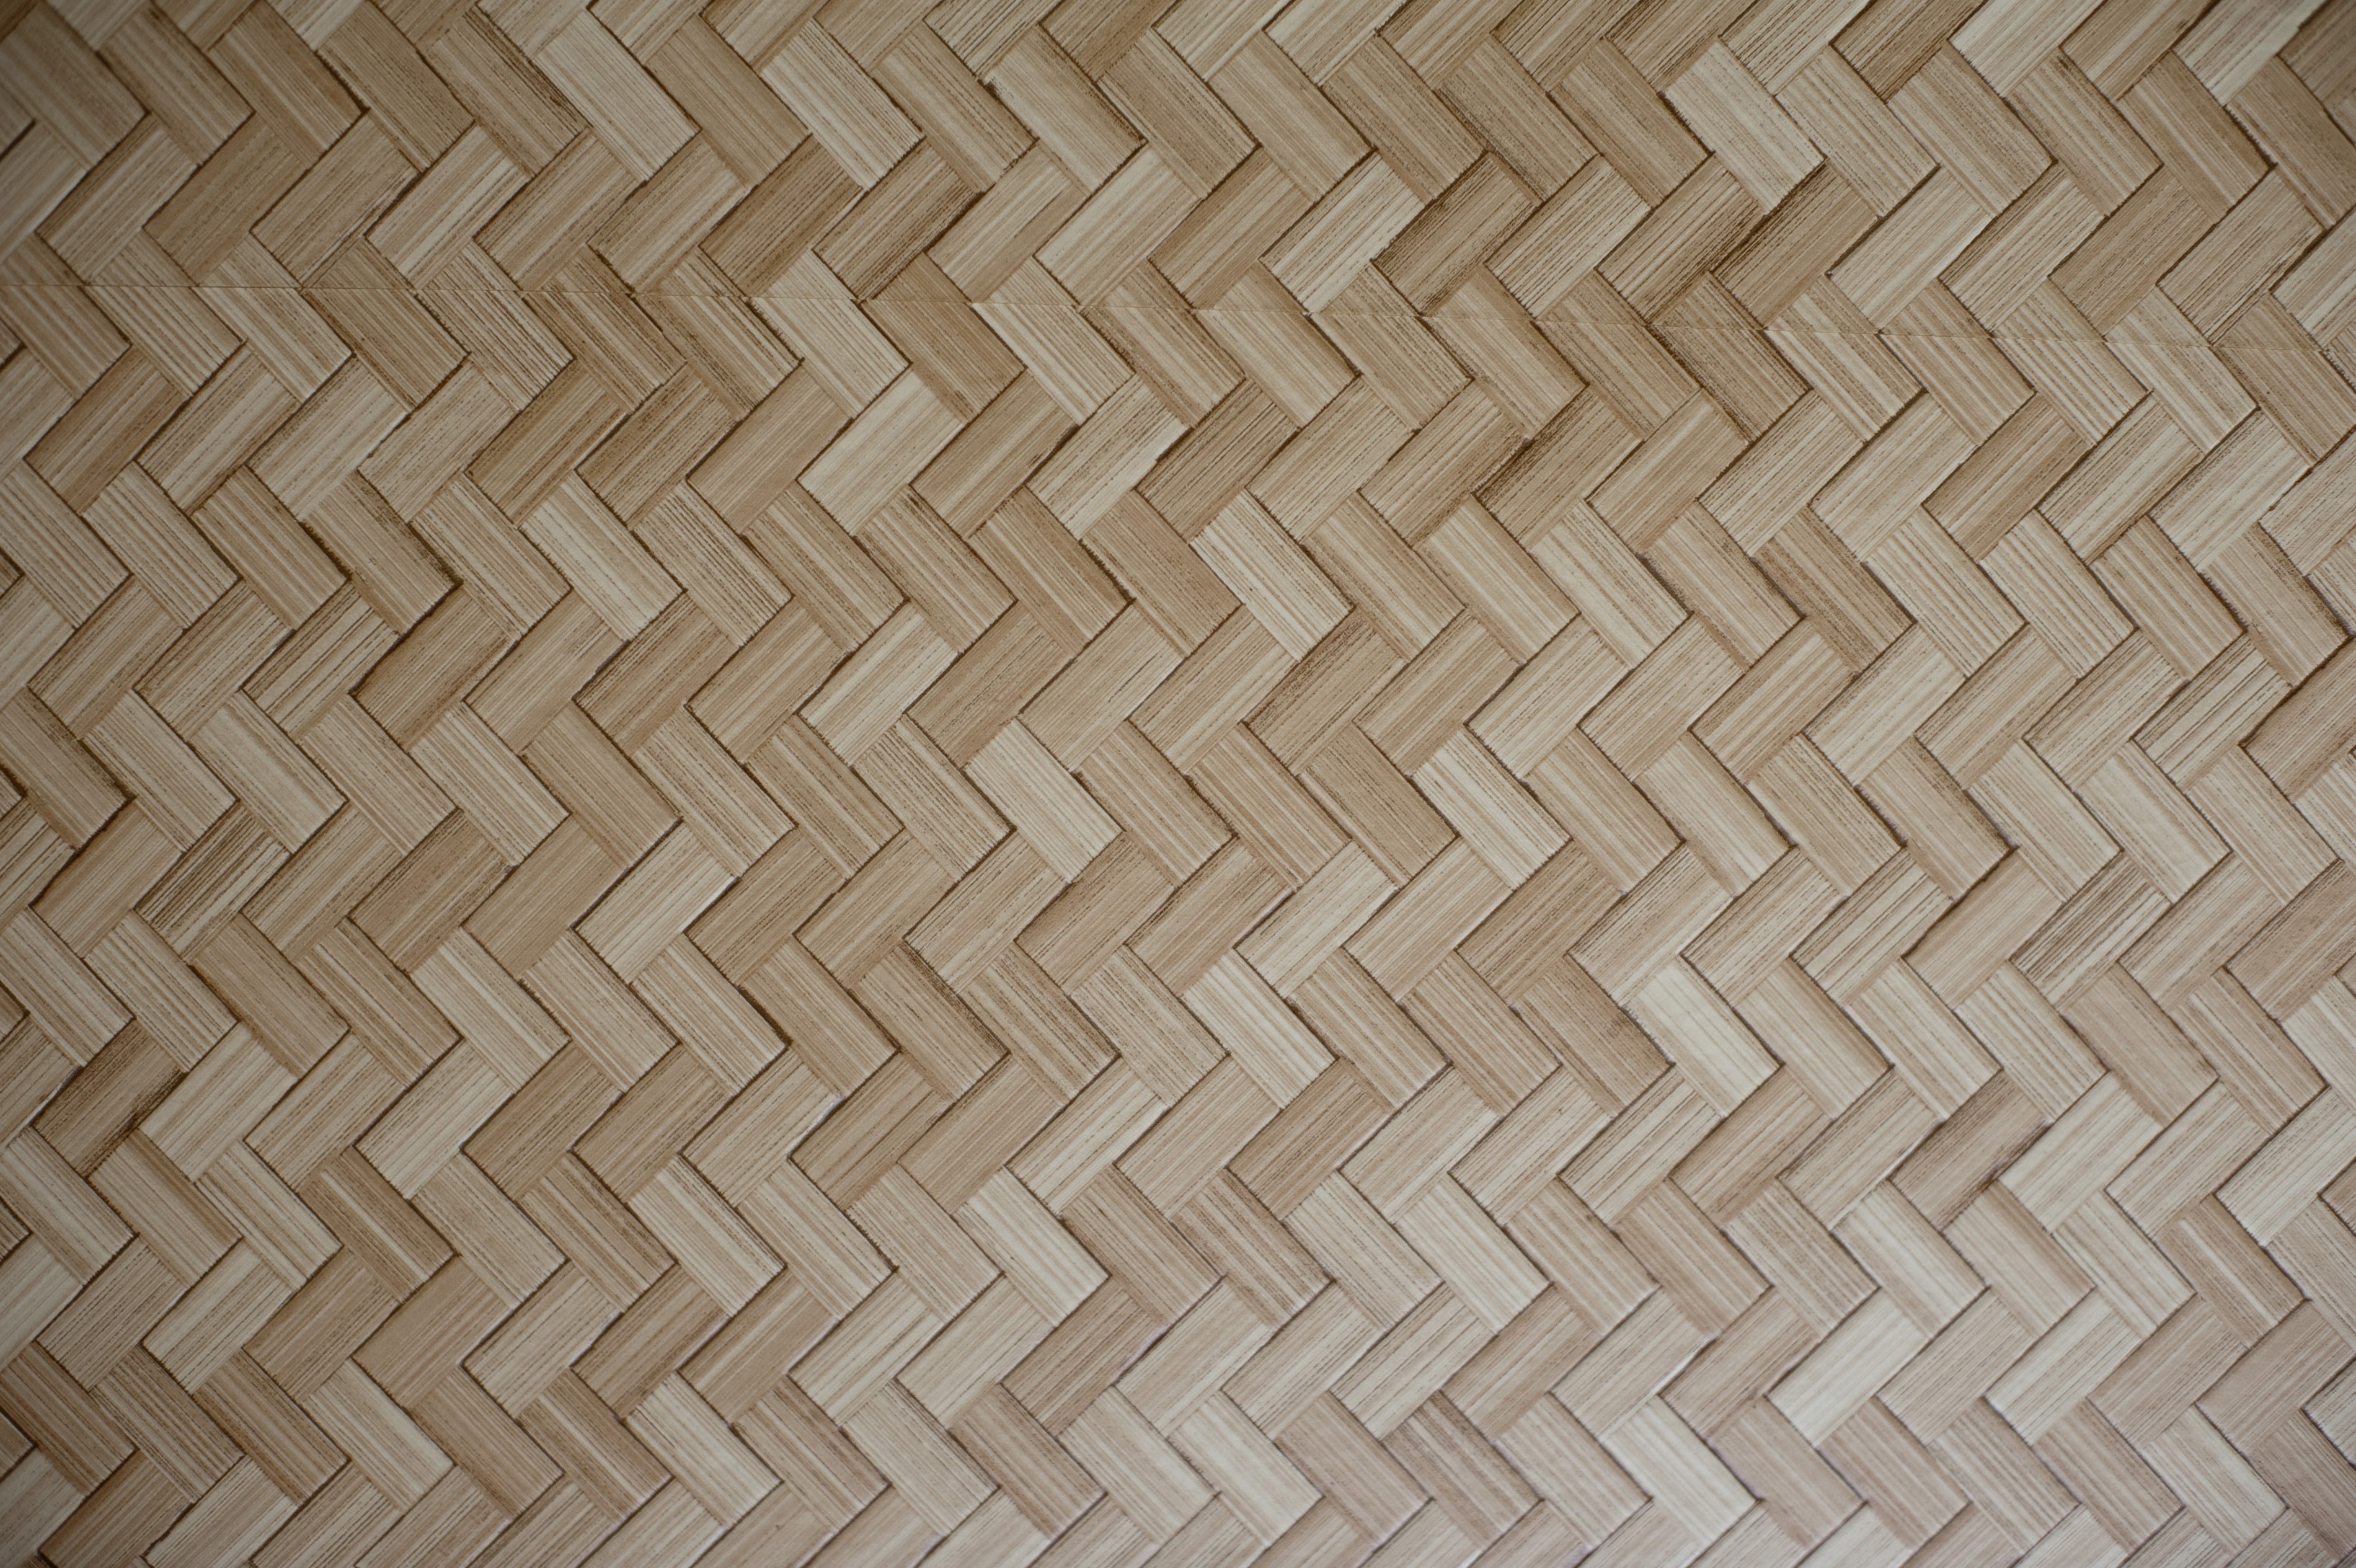 Background Texture Of Bamboo Weave In A Neat Repeating Zig